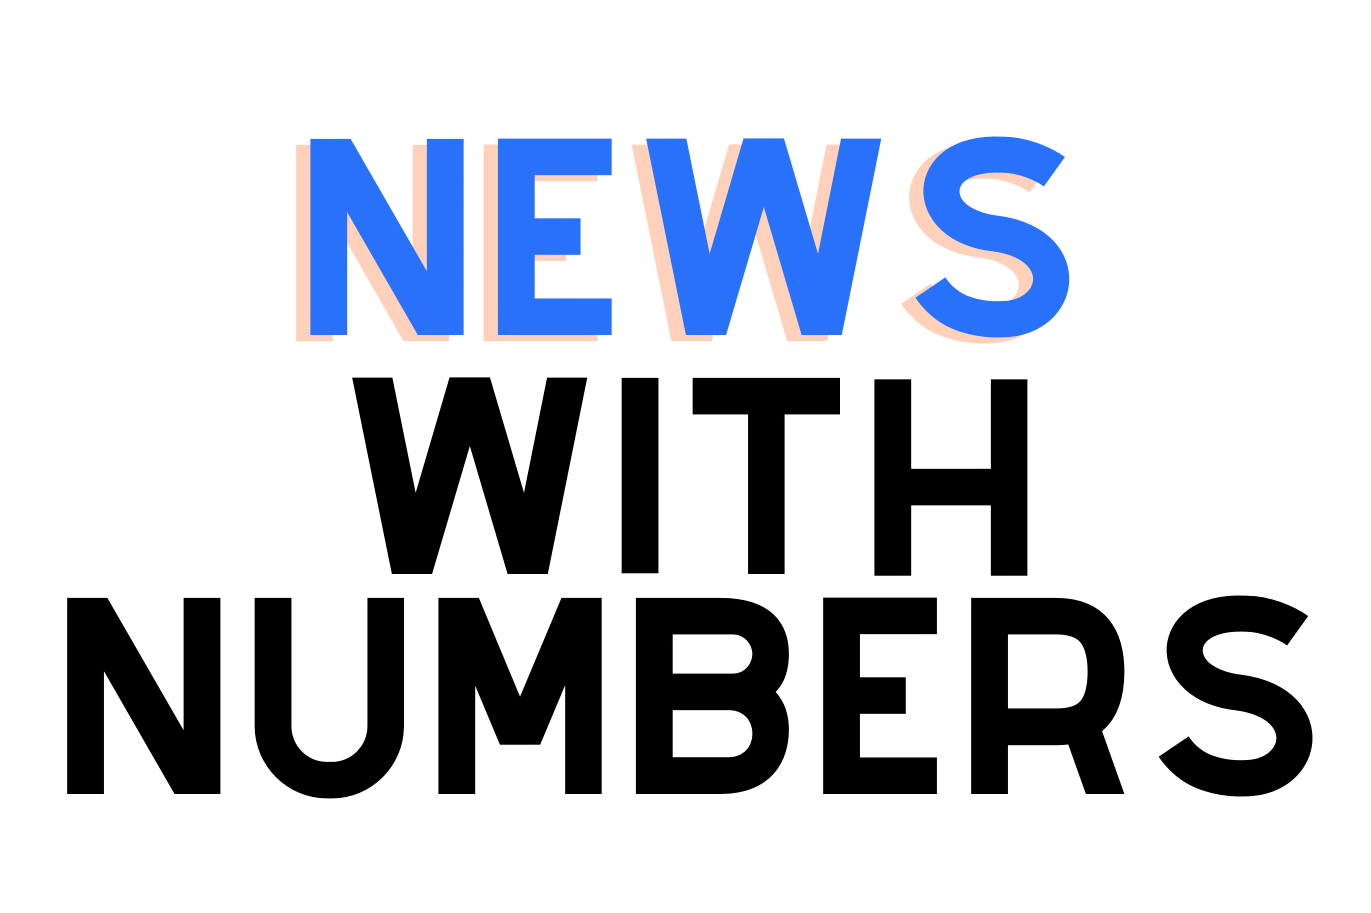 News With Numbers